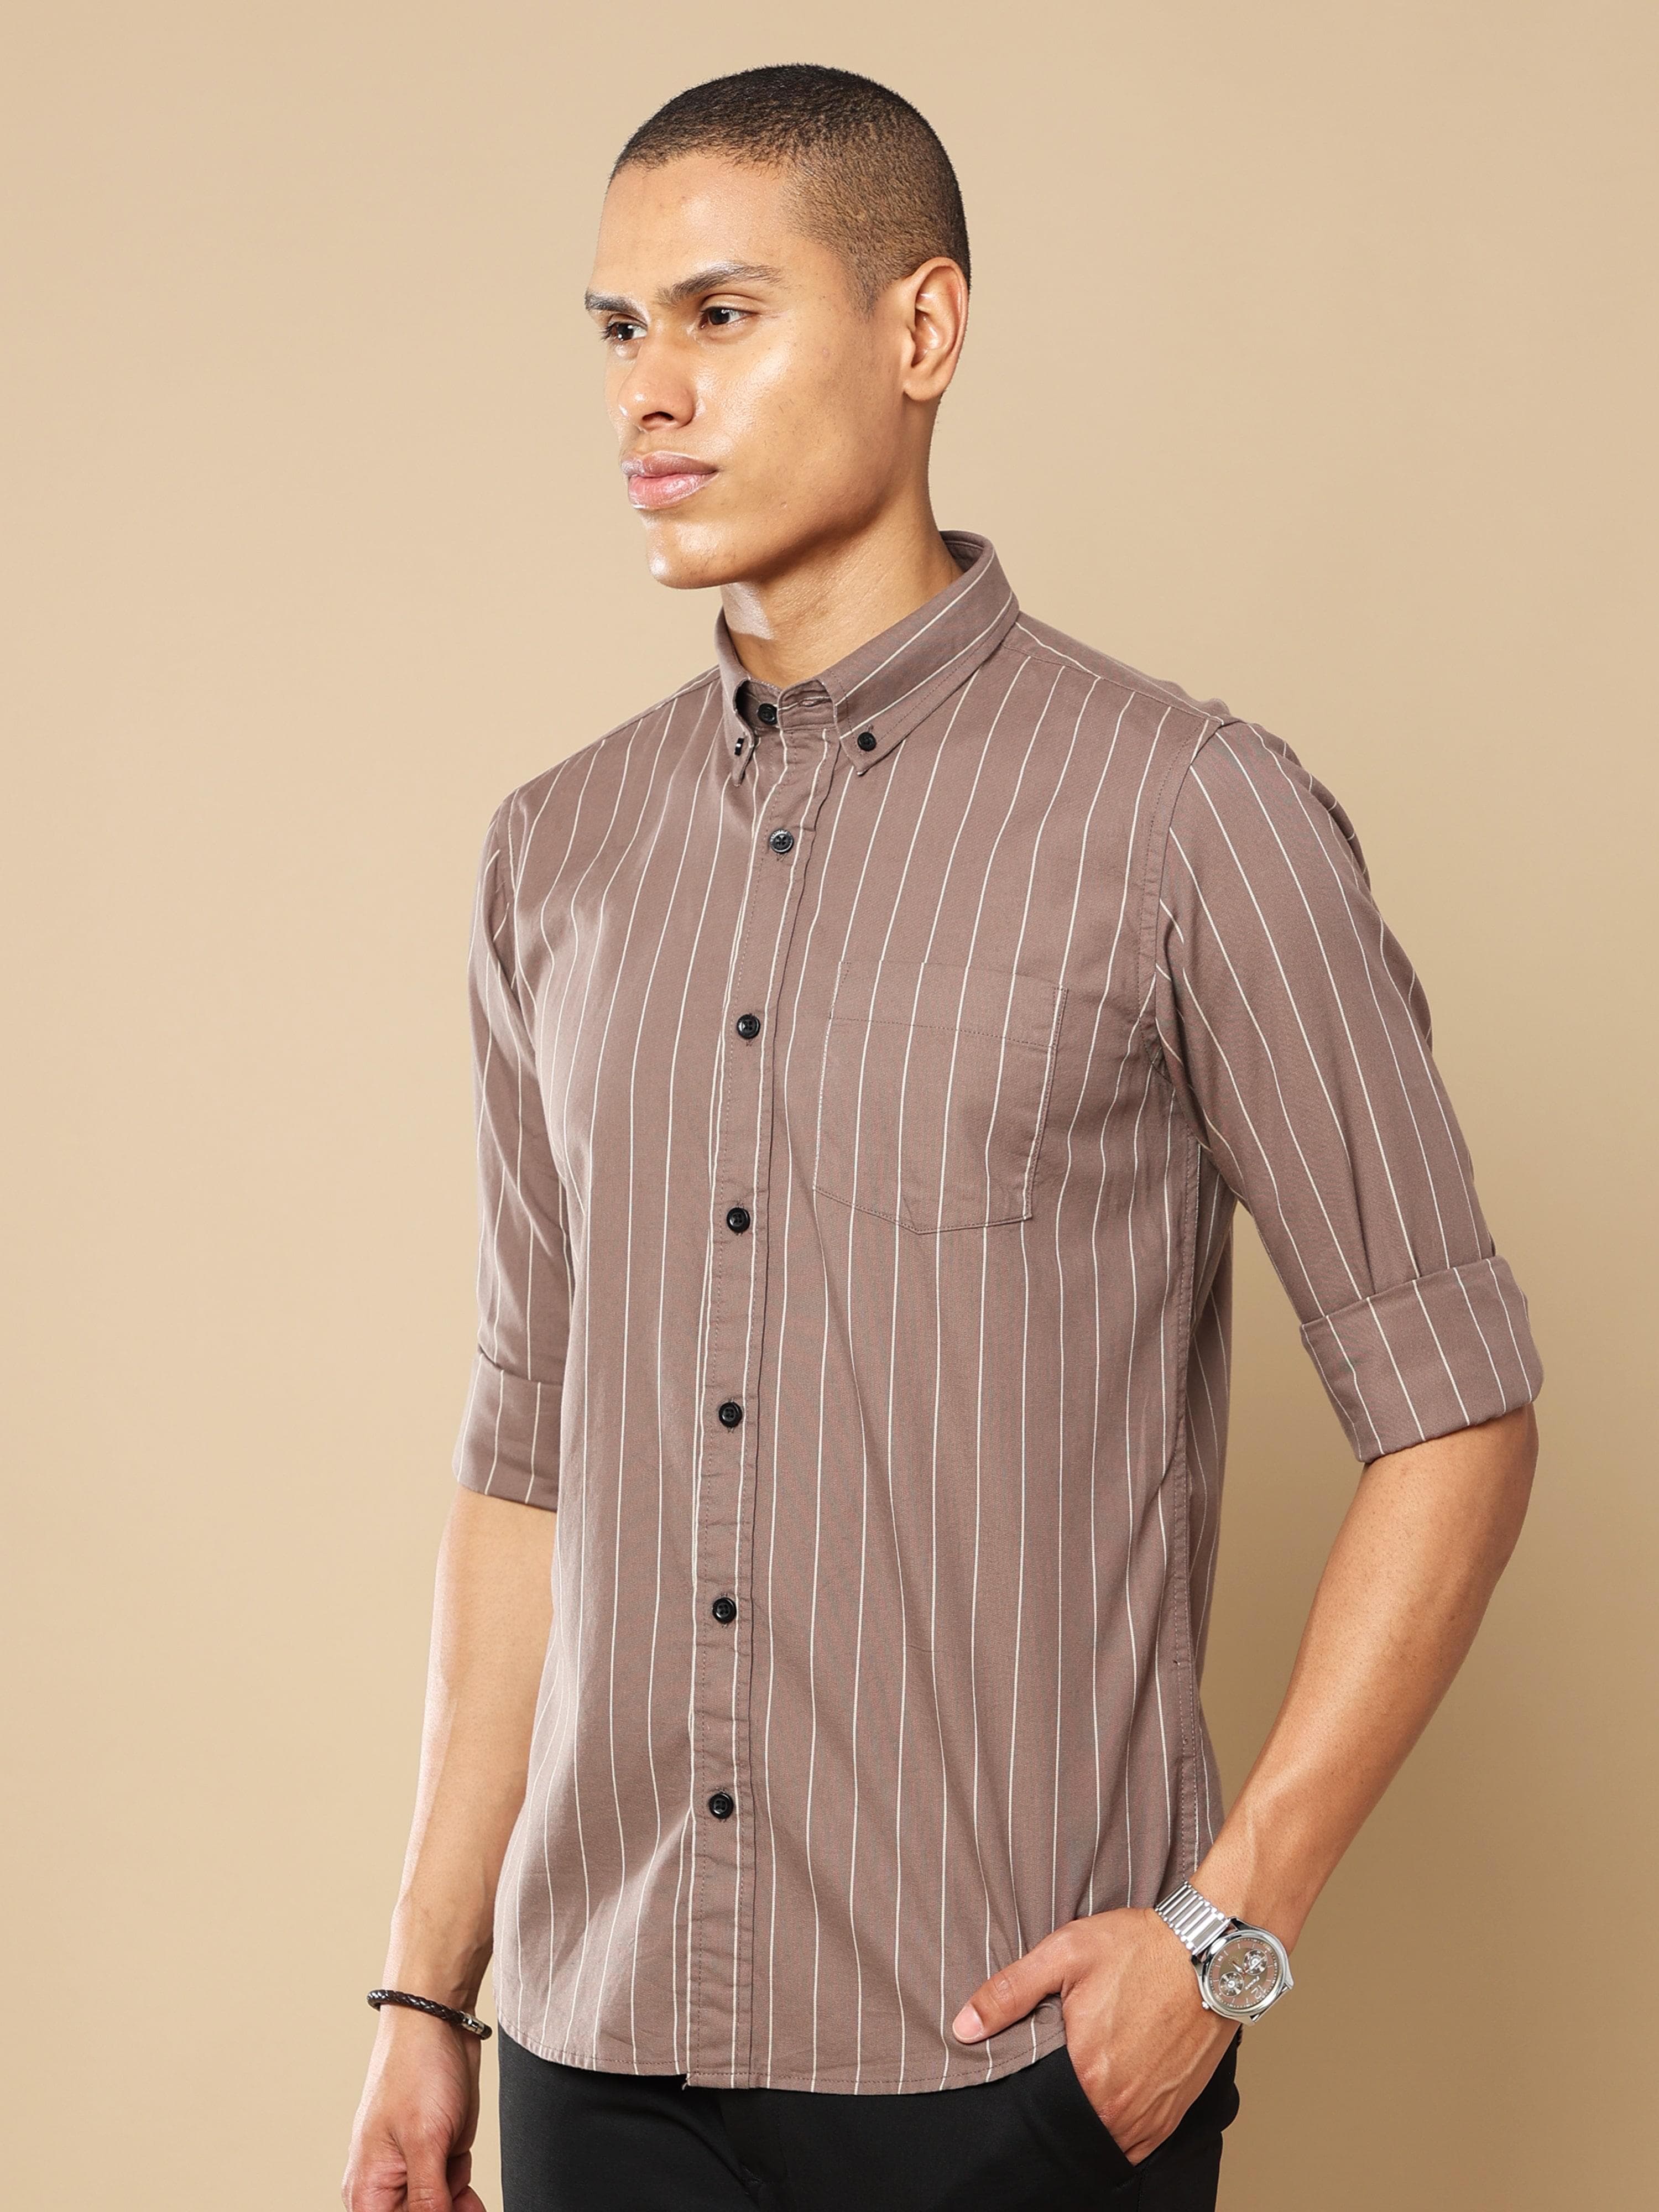 Shop Cool And Comfortable Brown Striped Shirt At Great PriceRs. 1099.00